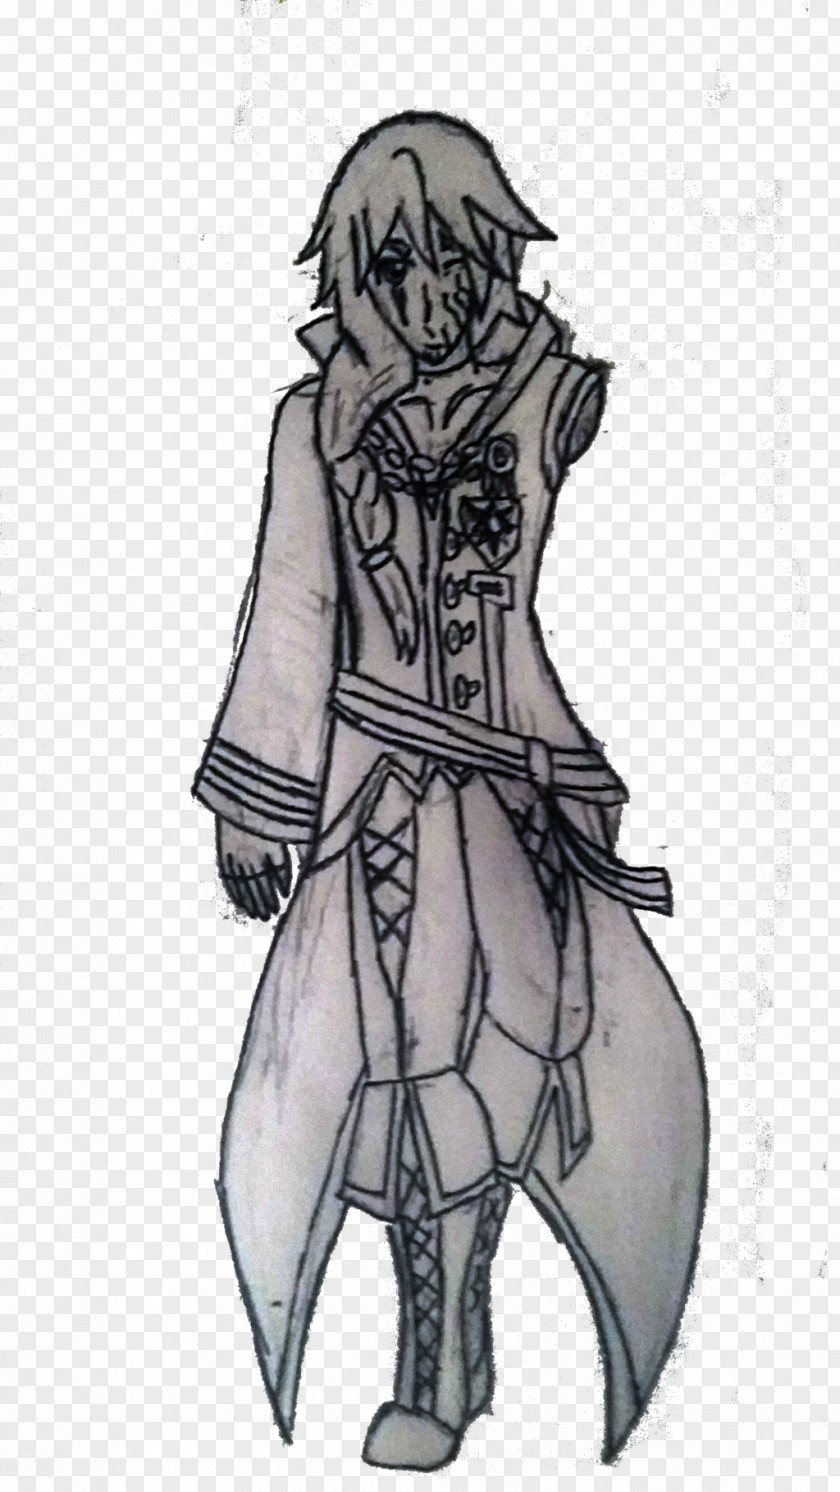 King Man Costume Design Armour Sketch PNG